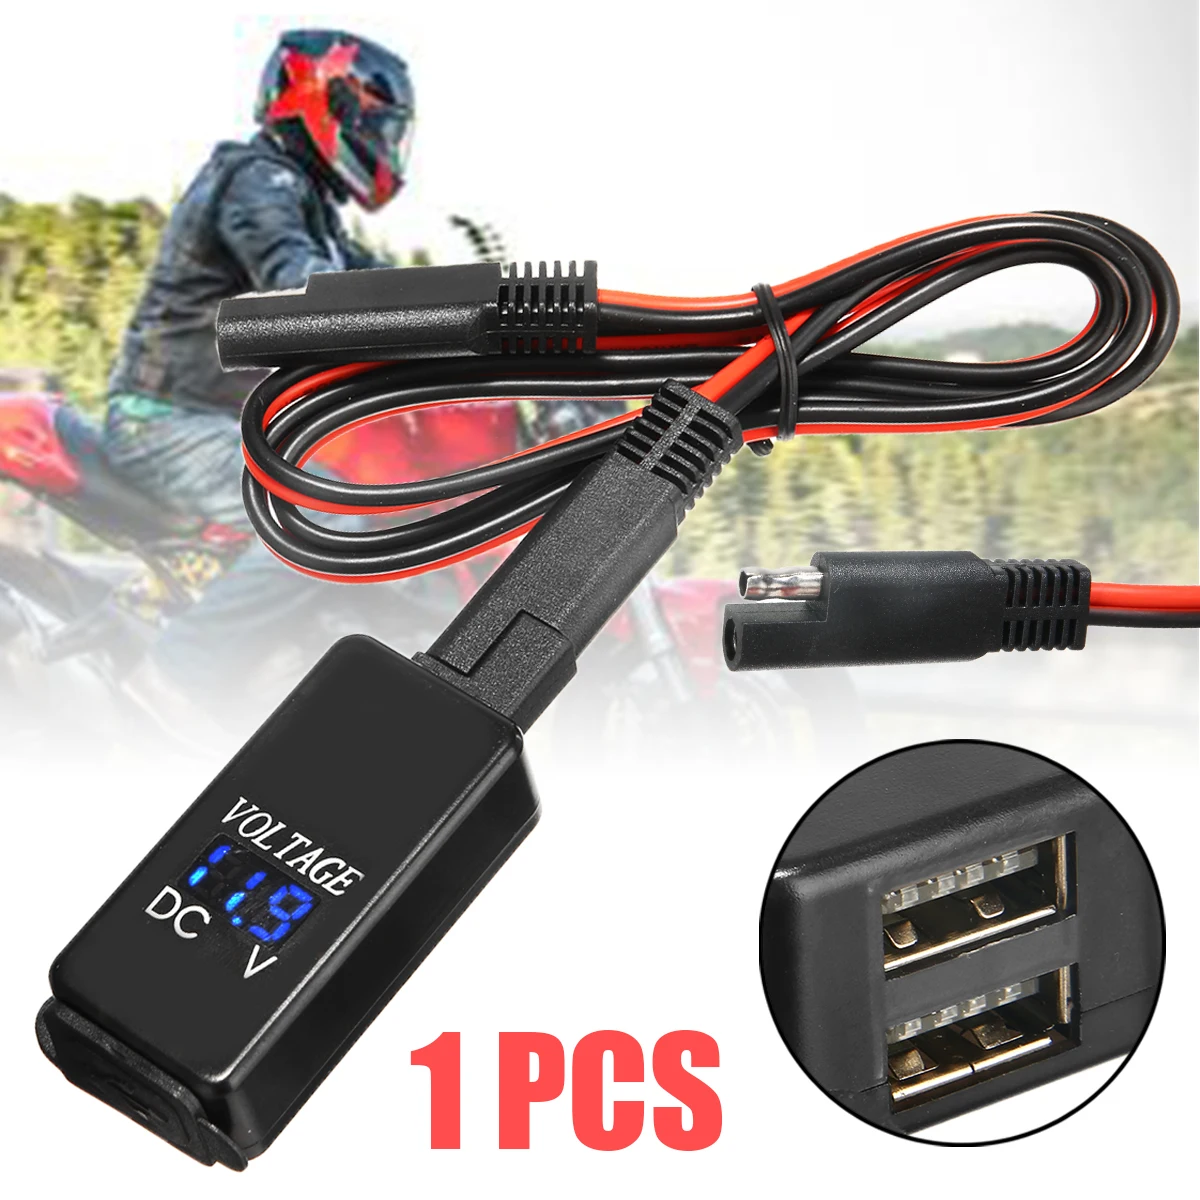 

Mayitr 1PC ABS Motorcycle SAE Dual Cable LED USB Adapter Phone Charger Voltmeter Motorcycle Battery Output Connector 5V 2.1A